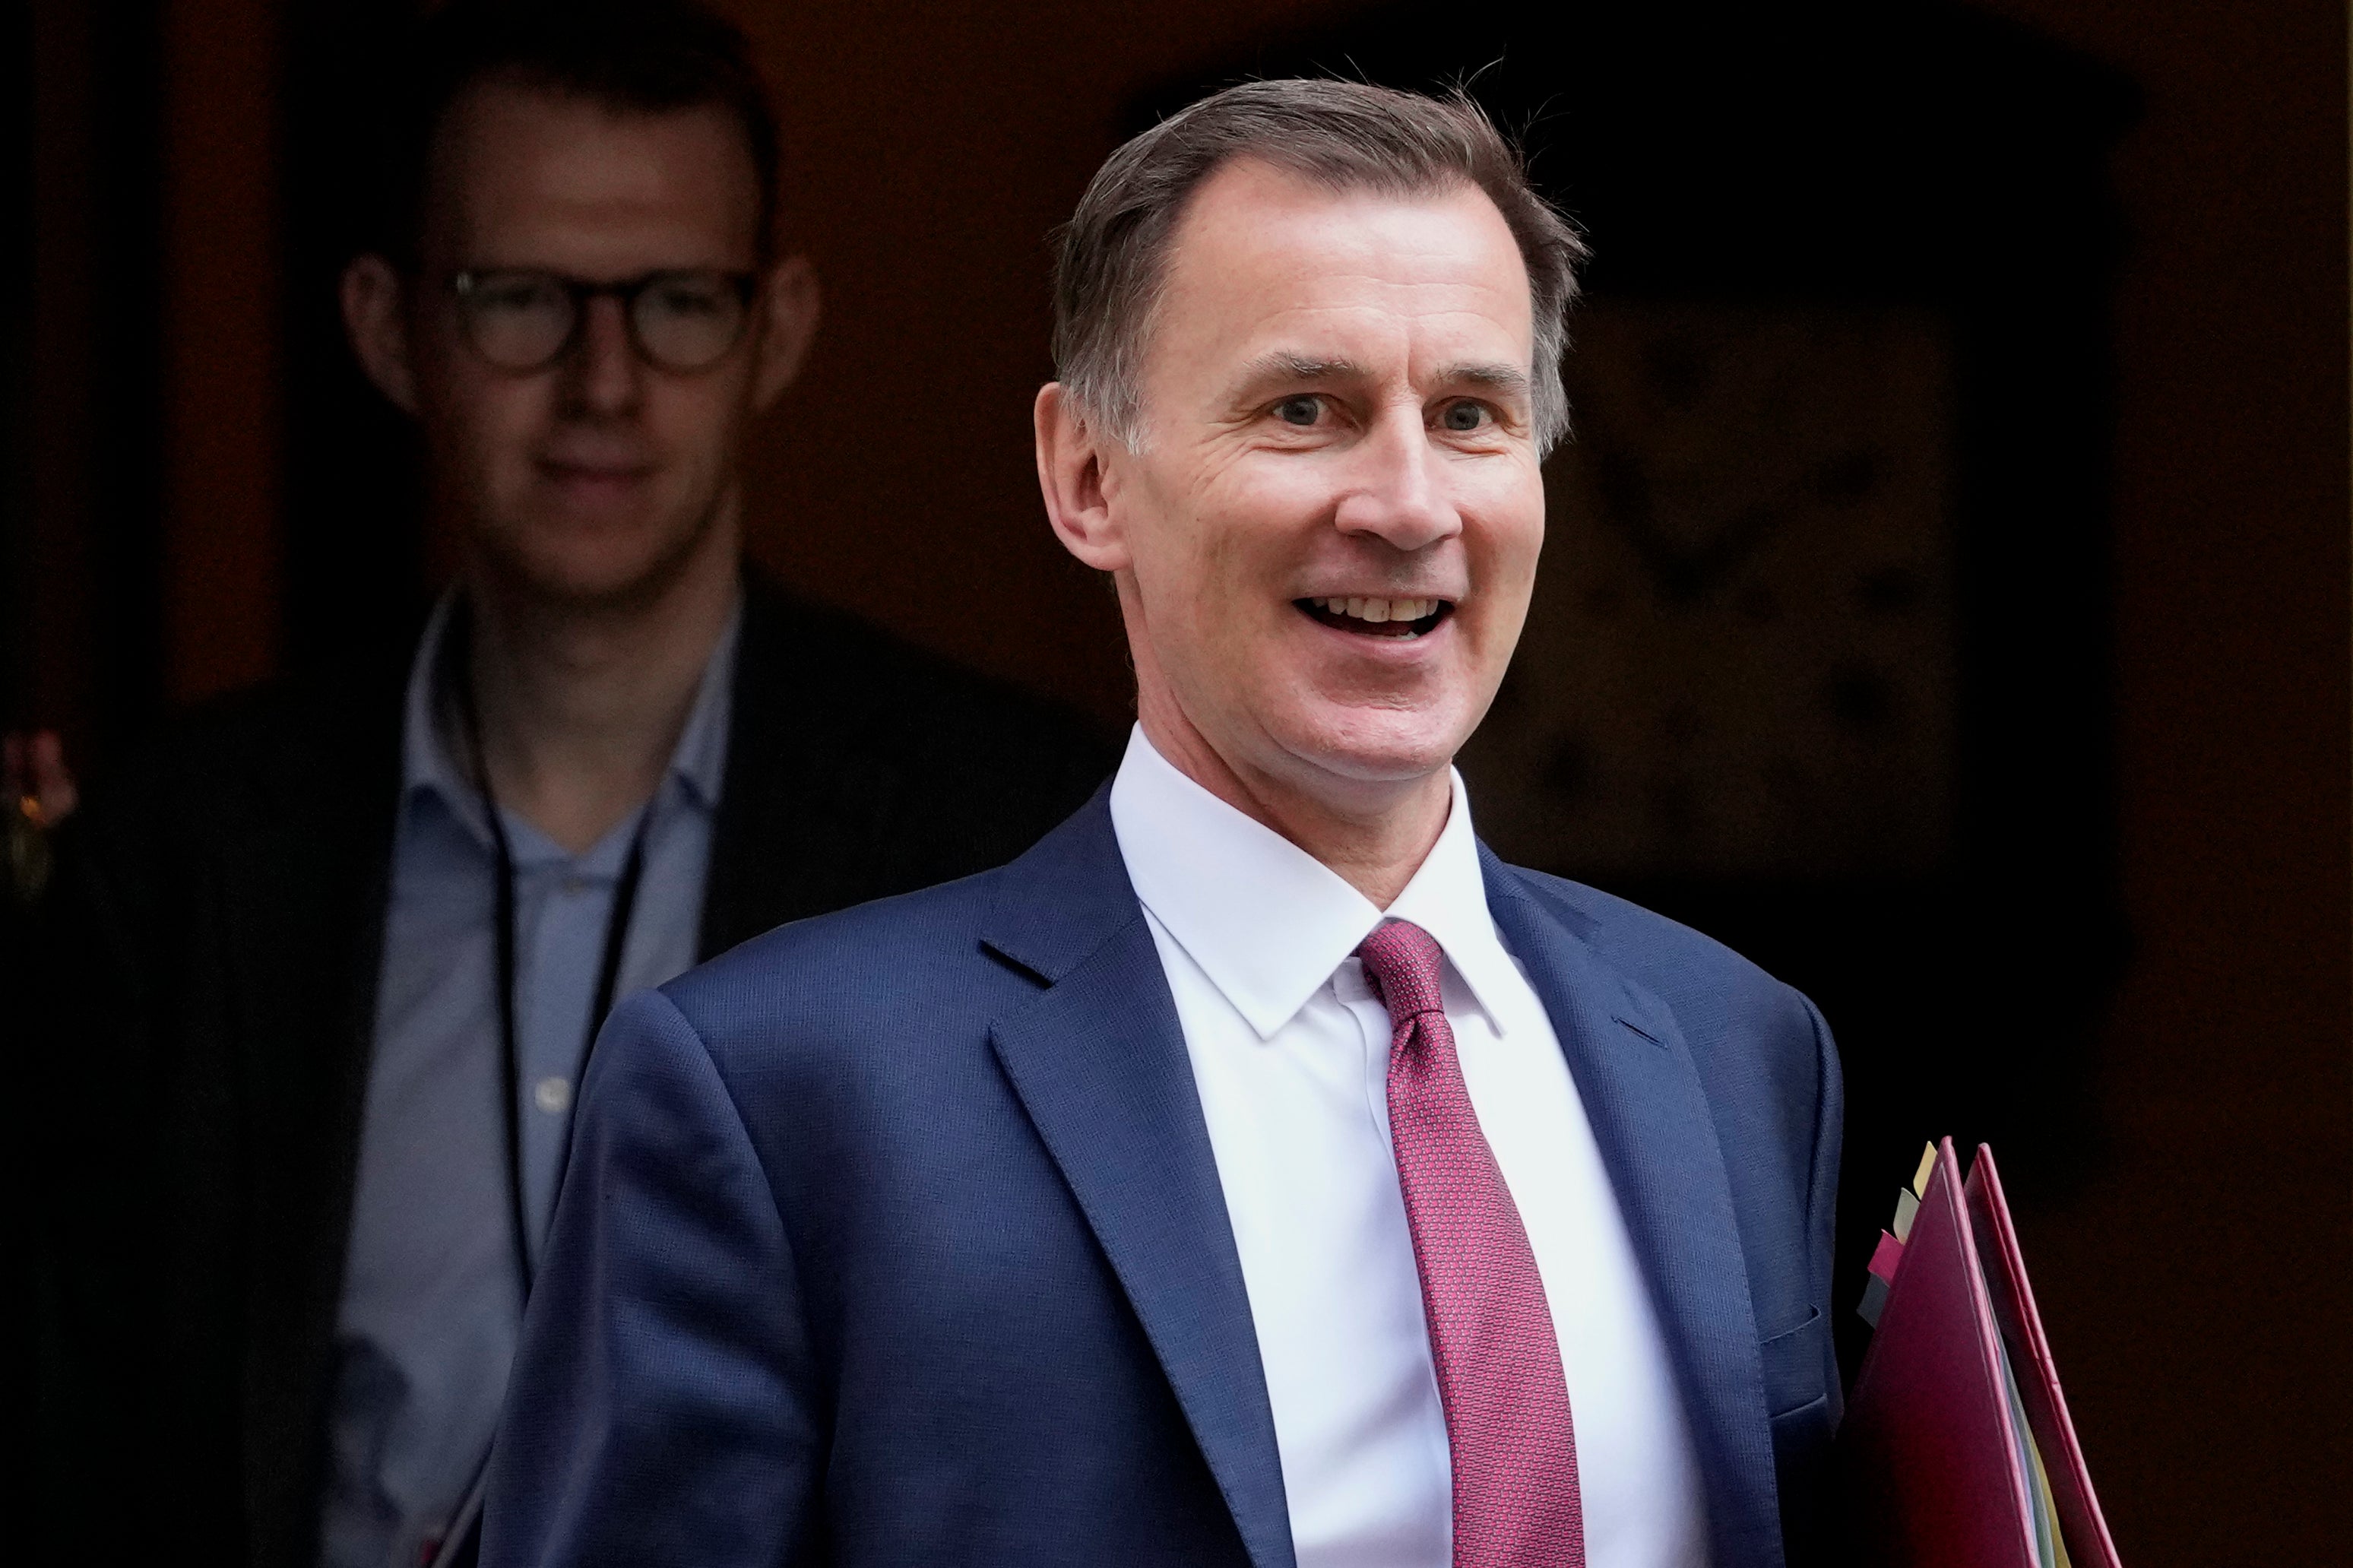 Chancellor Jeremy Hunt travelled to India on a separate trip to Rishi Sunak for UK-India trade talks